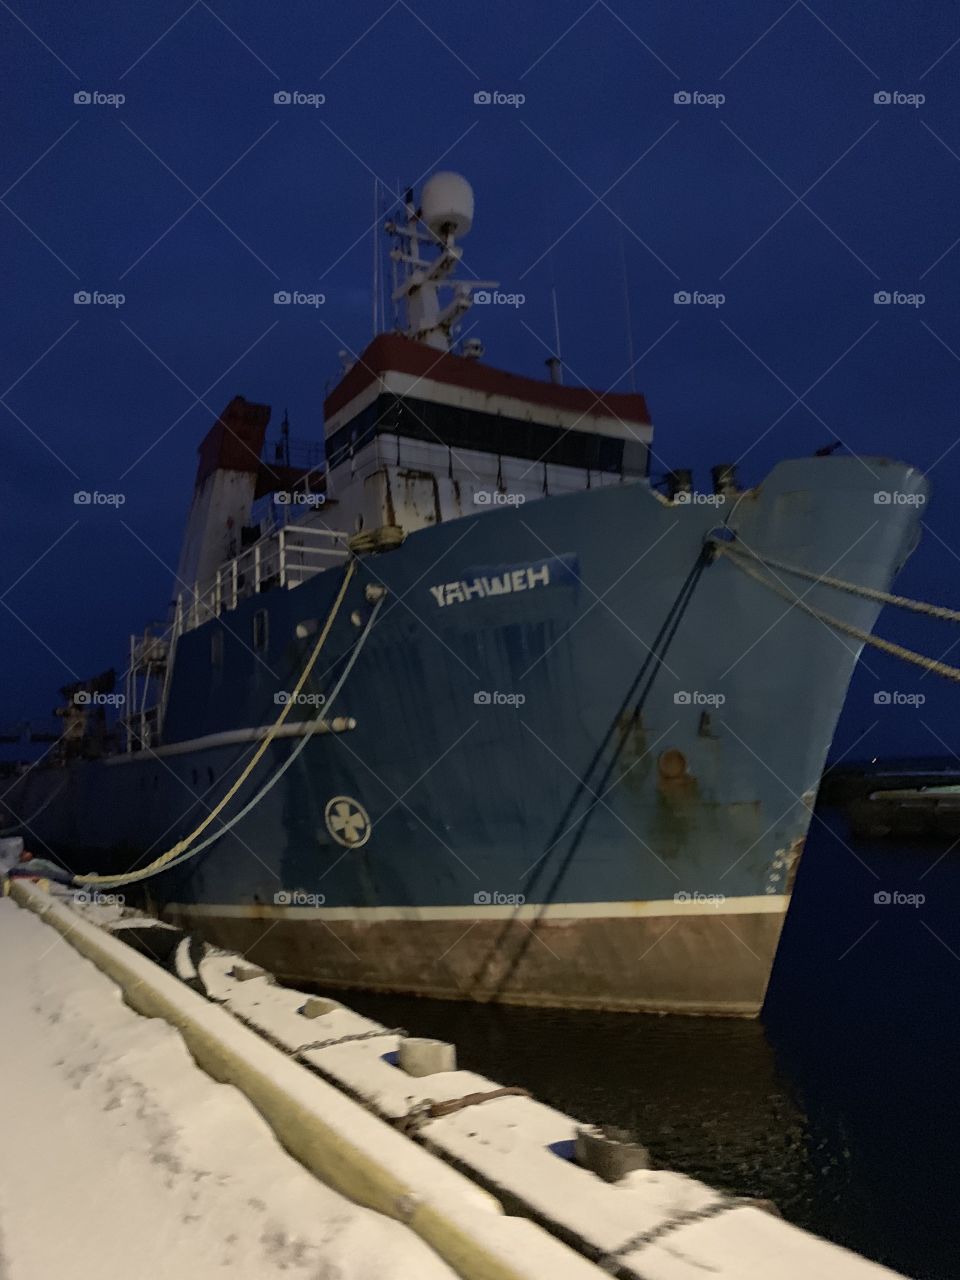 Atlantic Pursuit renamed Yahweh in the harbour at night 